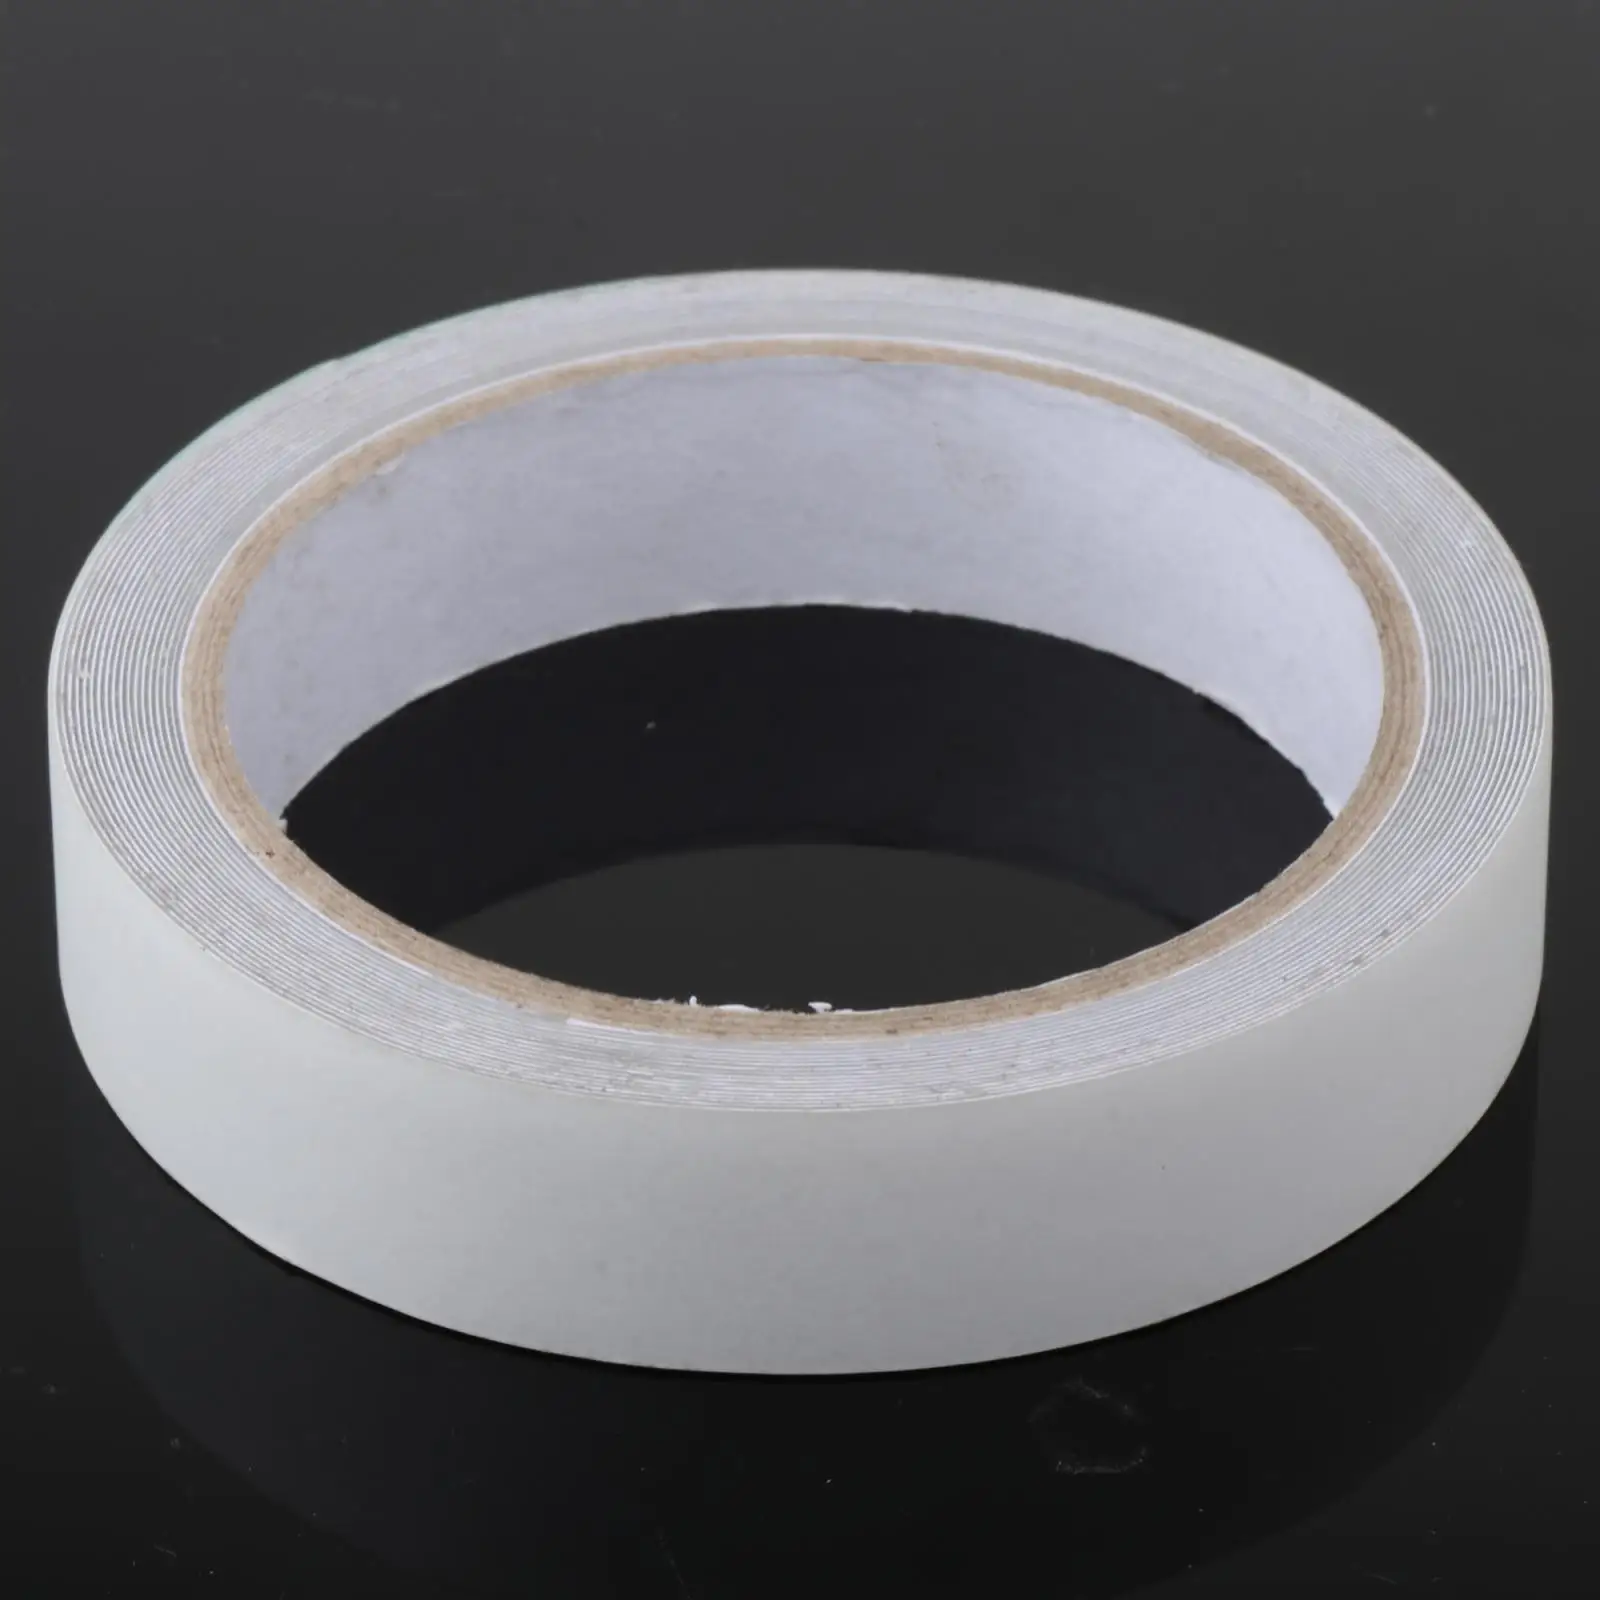 Swimming Rings Repair Tape Durable Waterproof Cover Patch Awning Tent Pool Patch for Inflatable Boat Trampoline Raft Air Bed